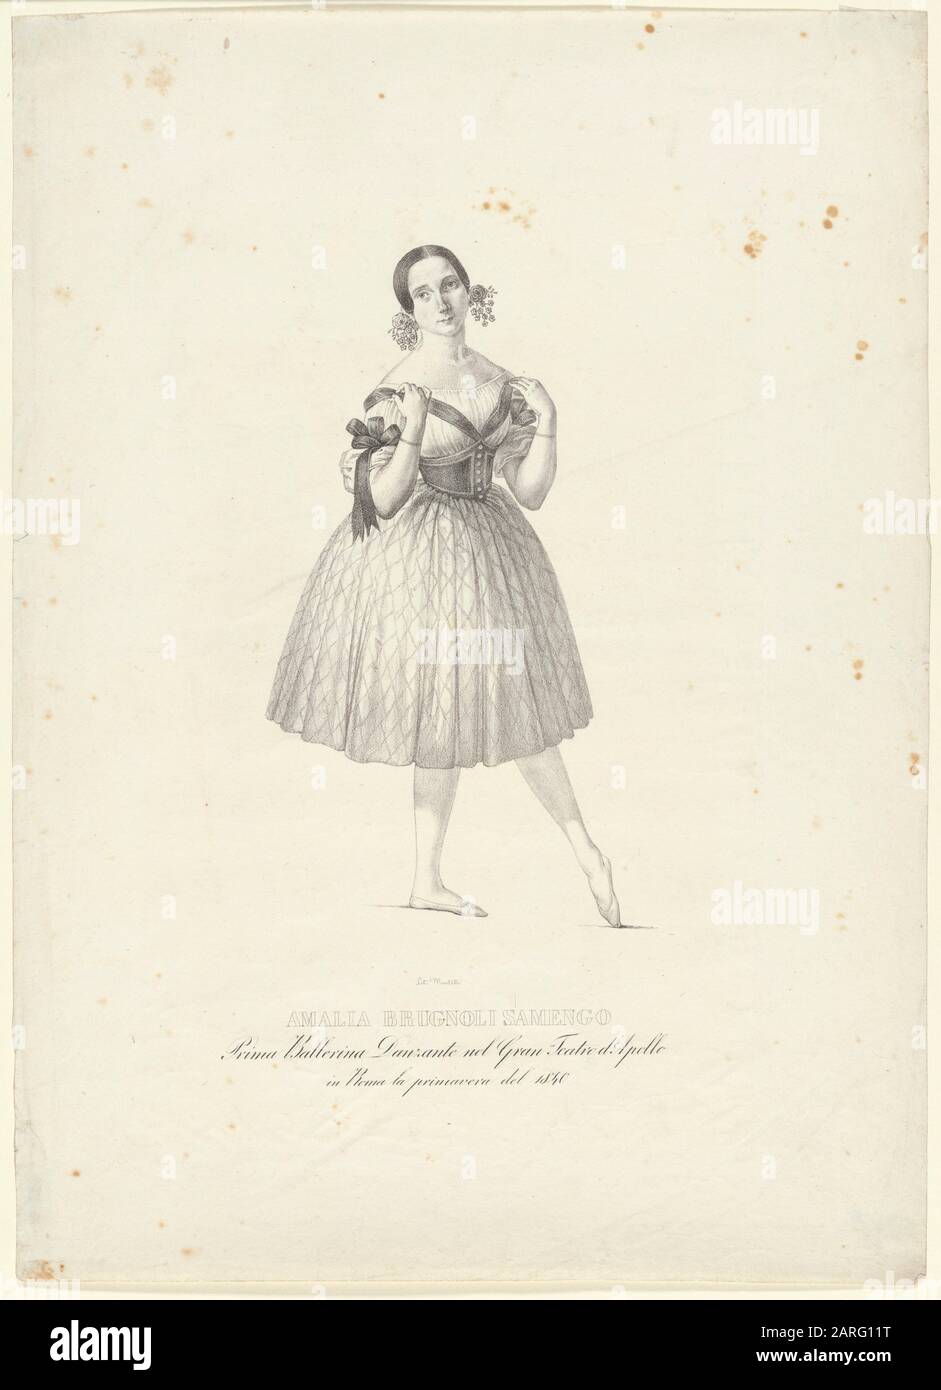 Amalia Brugnoli Samengo, first ballerina dancing in the great Apollo  Theater in Rome, spring 1840 Additional title: Unidentified ballet. Hammers  Stock Photo - Alamy